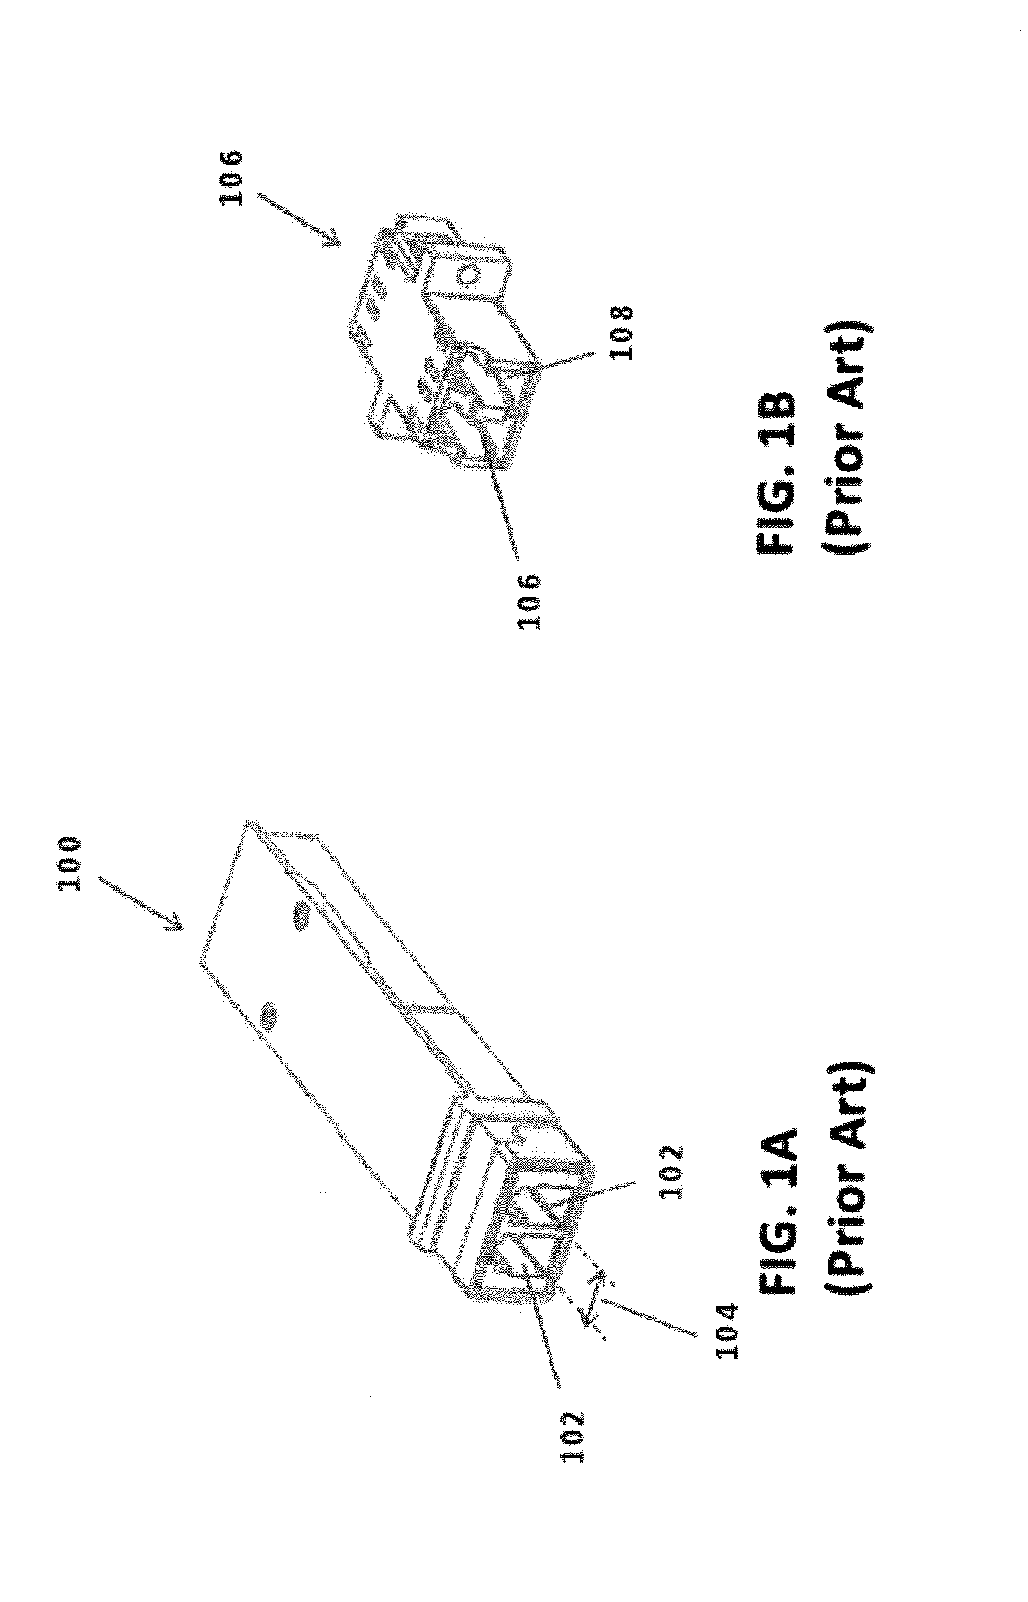 Ultra-small form factor optical connector having dual alignment keys